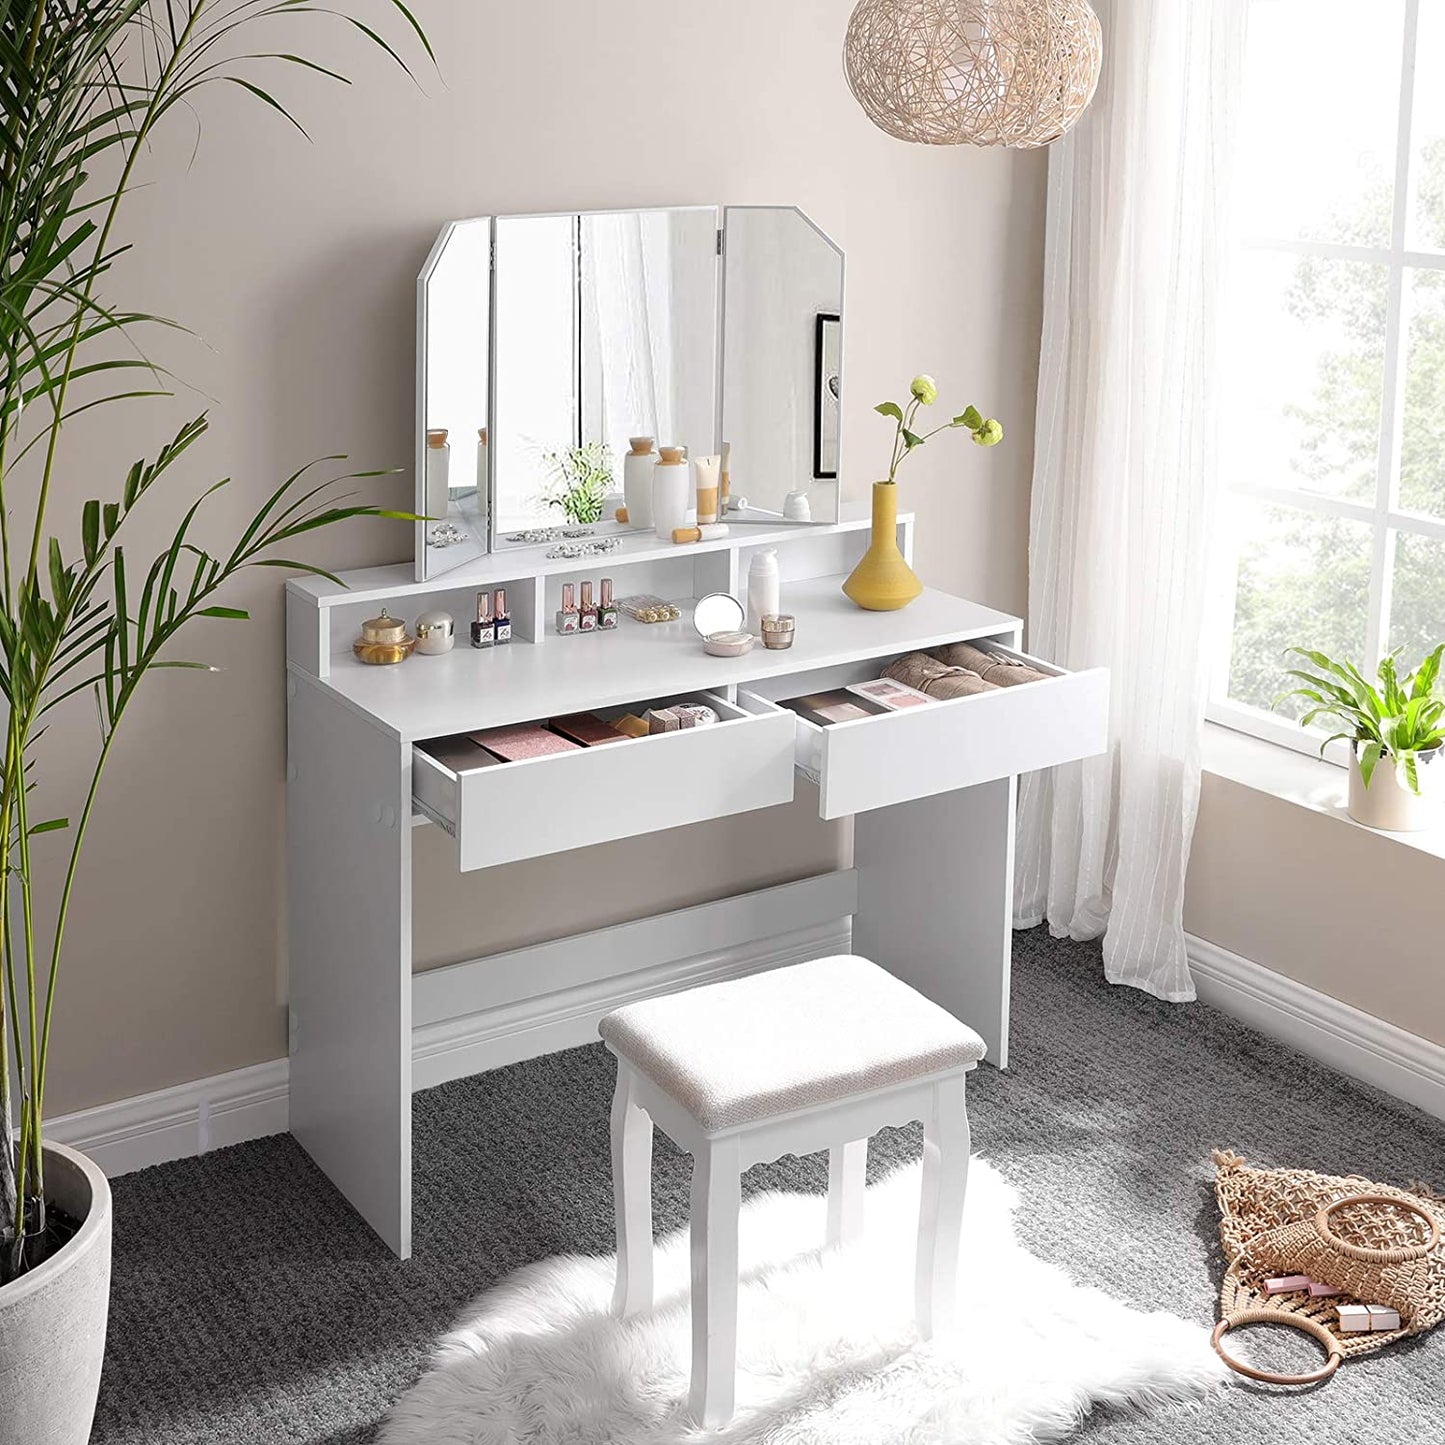 Nancy's Bryants Corner Dressing Table with Folding Mirror - Make-up Table - Dressing Tables - Modern - White - 100 x 40 x 142 cm